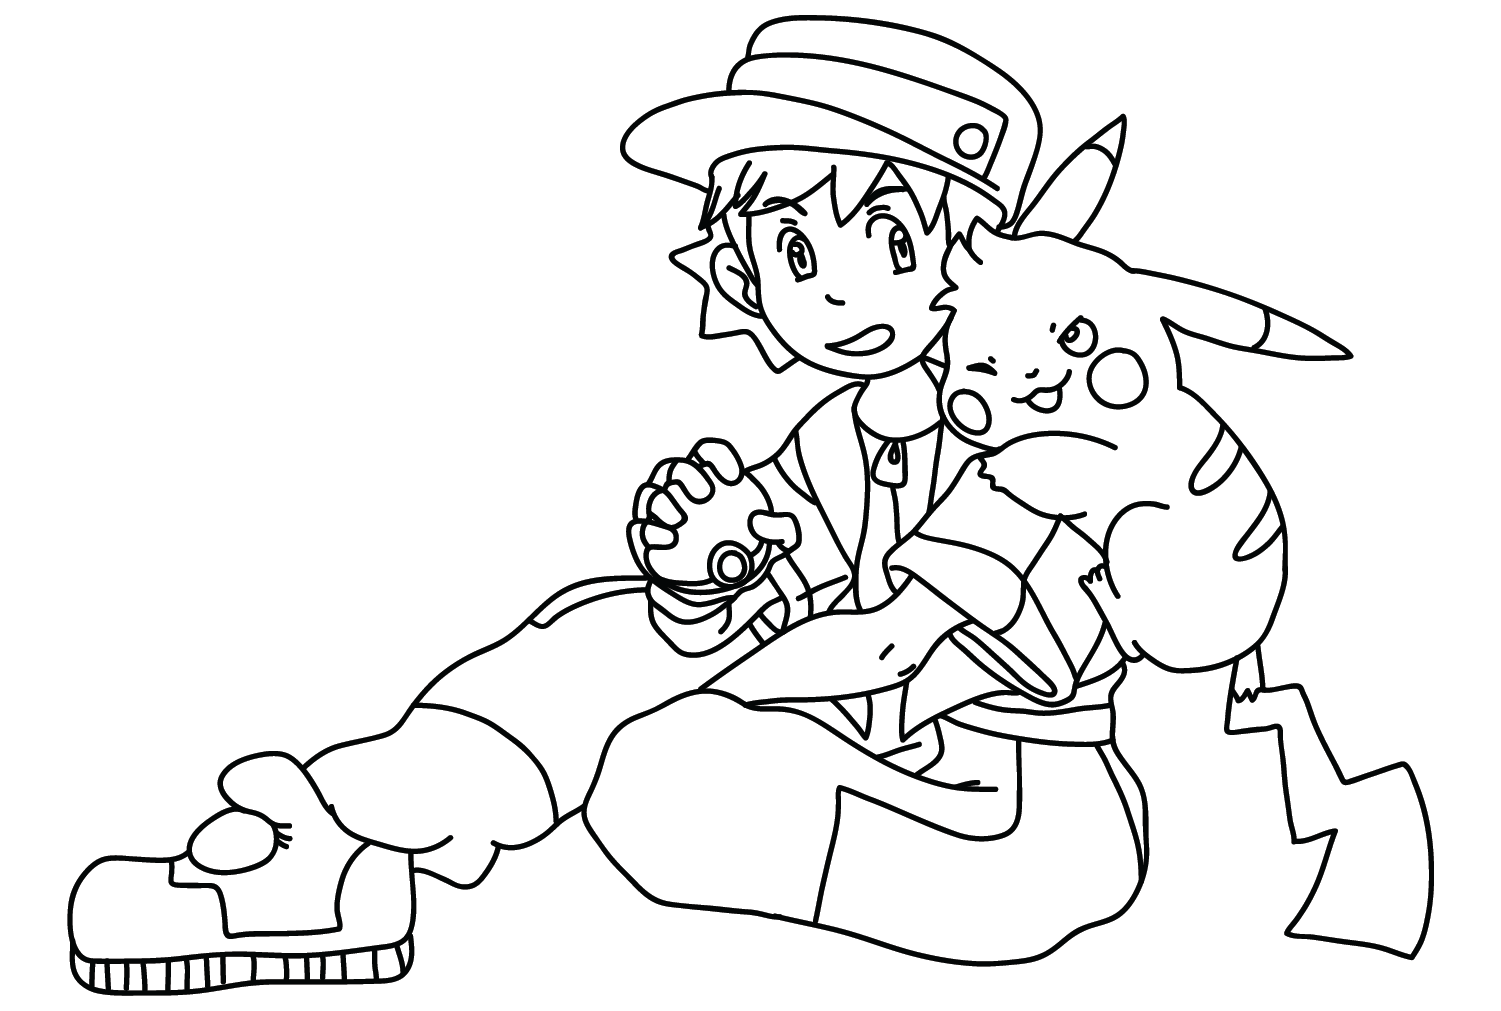 Pikachu Pokemon, Ritchie Coloring Pages to Printable